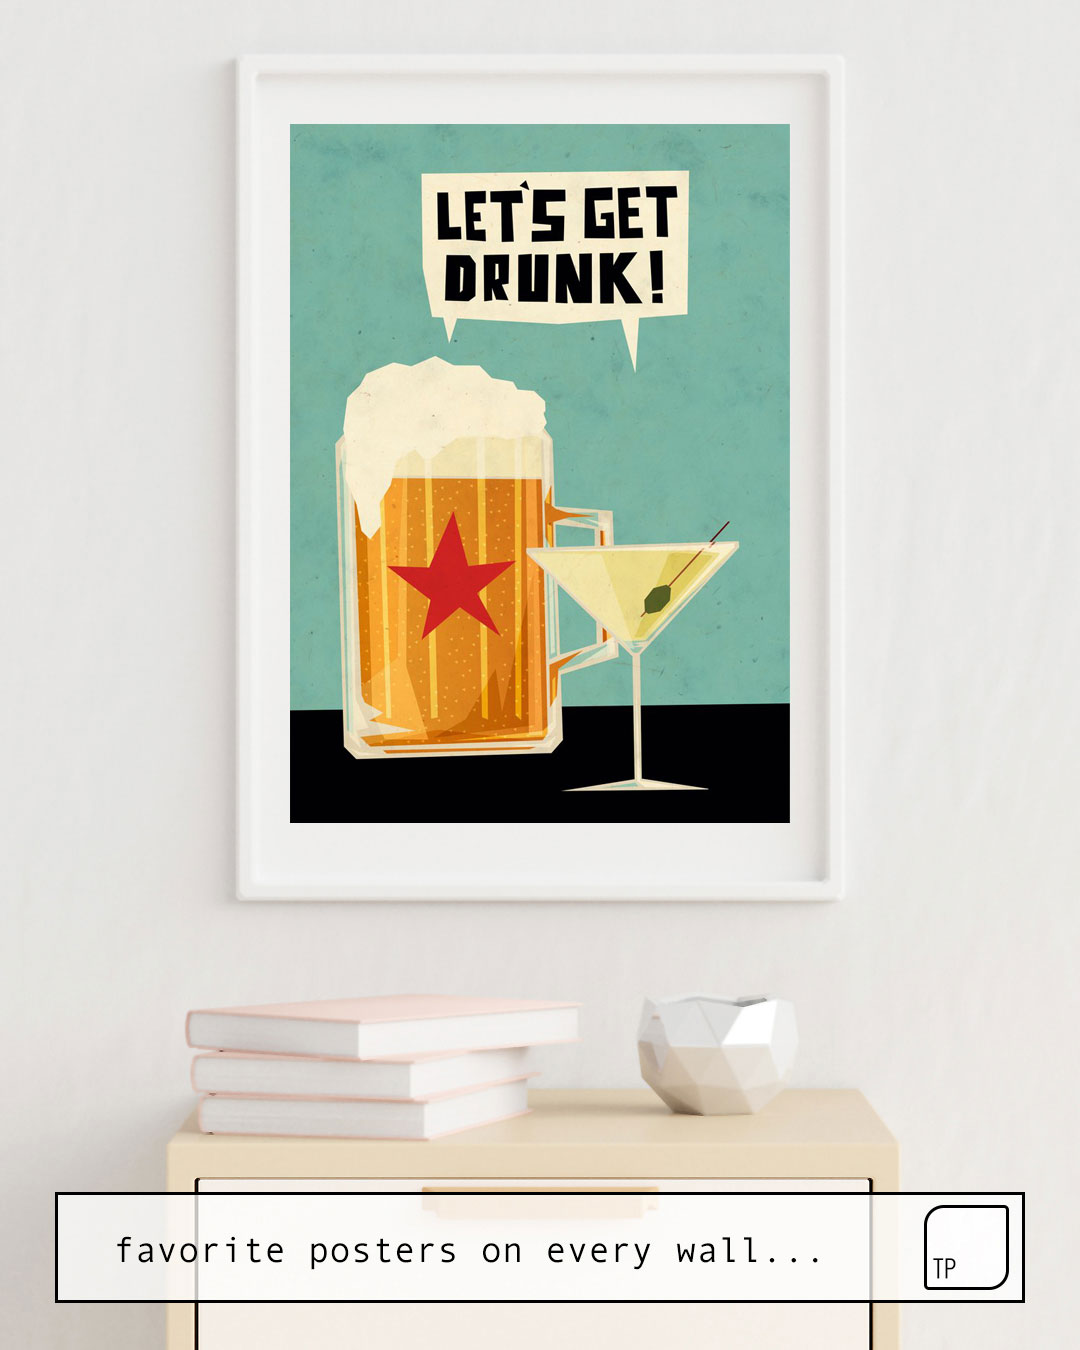 The photo shows an example of furnishing with the motif LET'S GET DRUNK! by Yetiland as mural